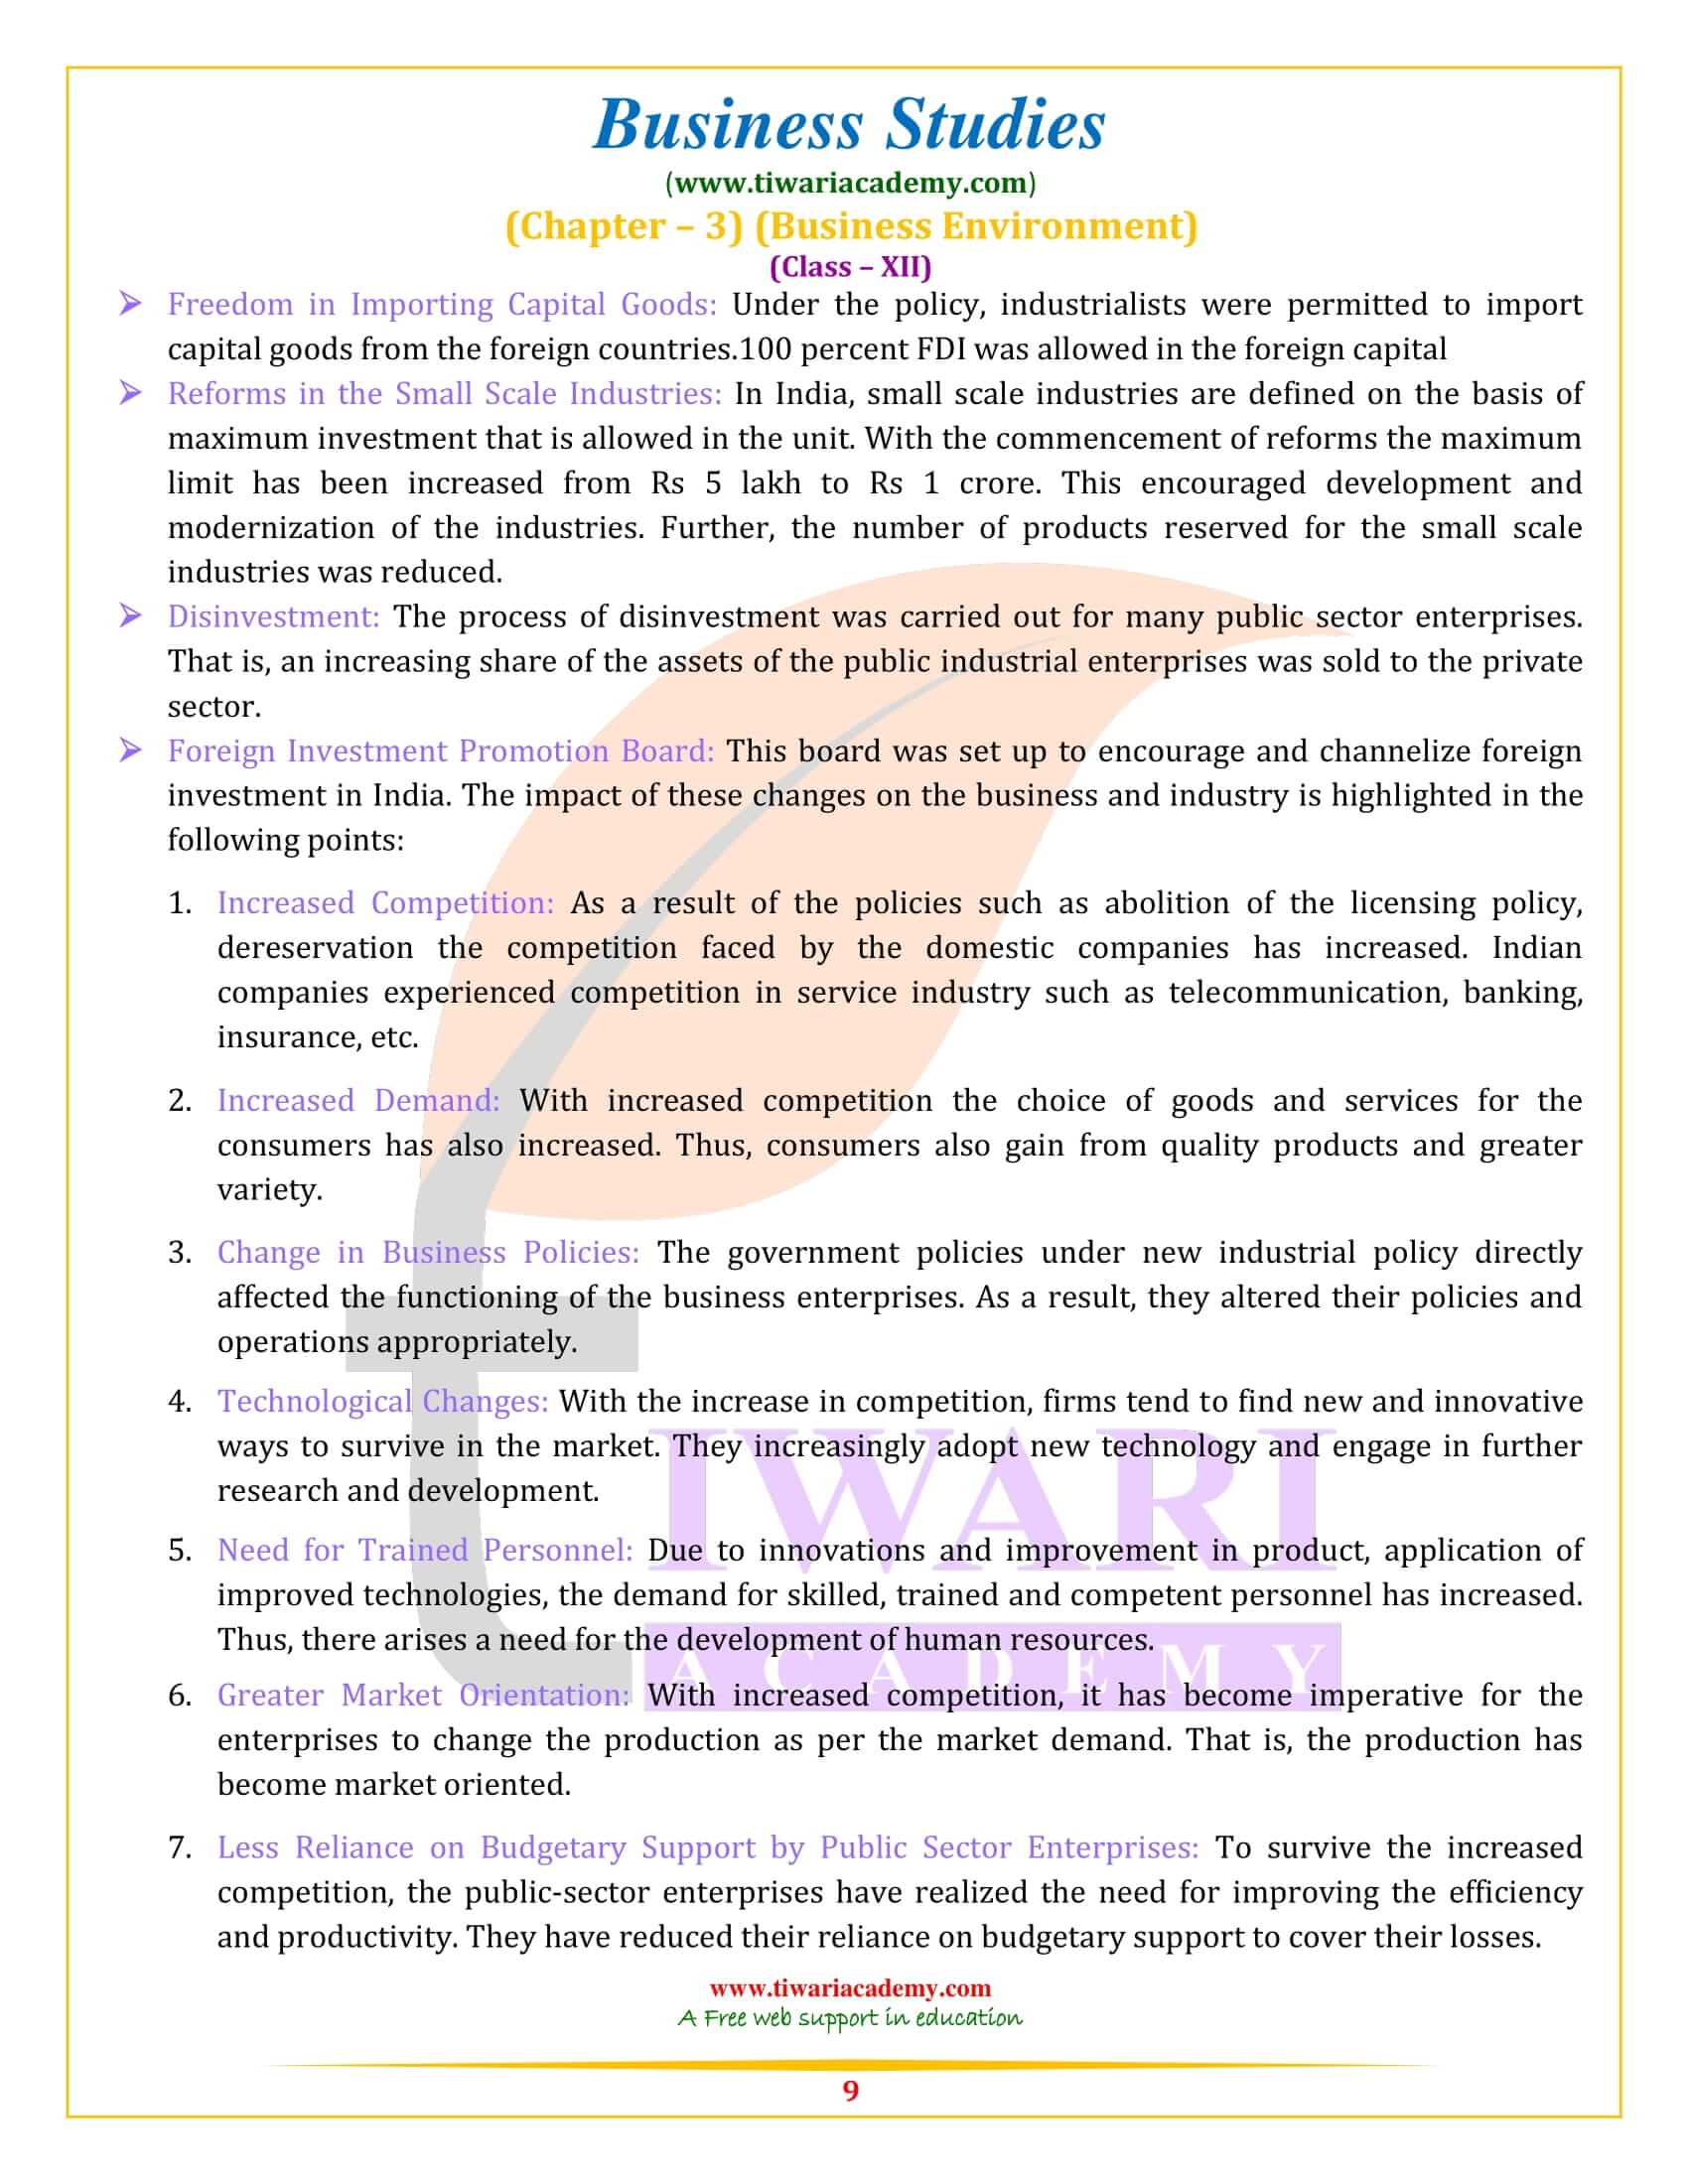 NCERT Solutions for Class 12 Business Studies Chapter 3 free download